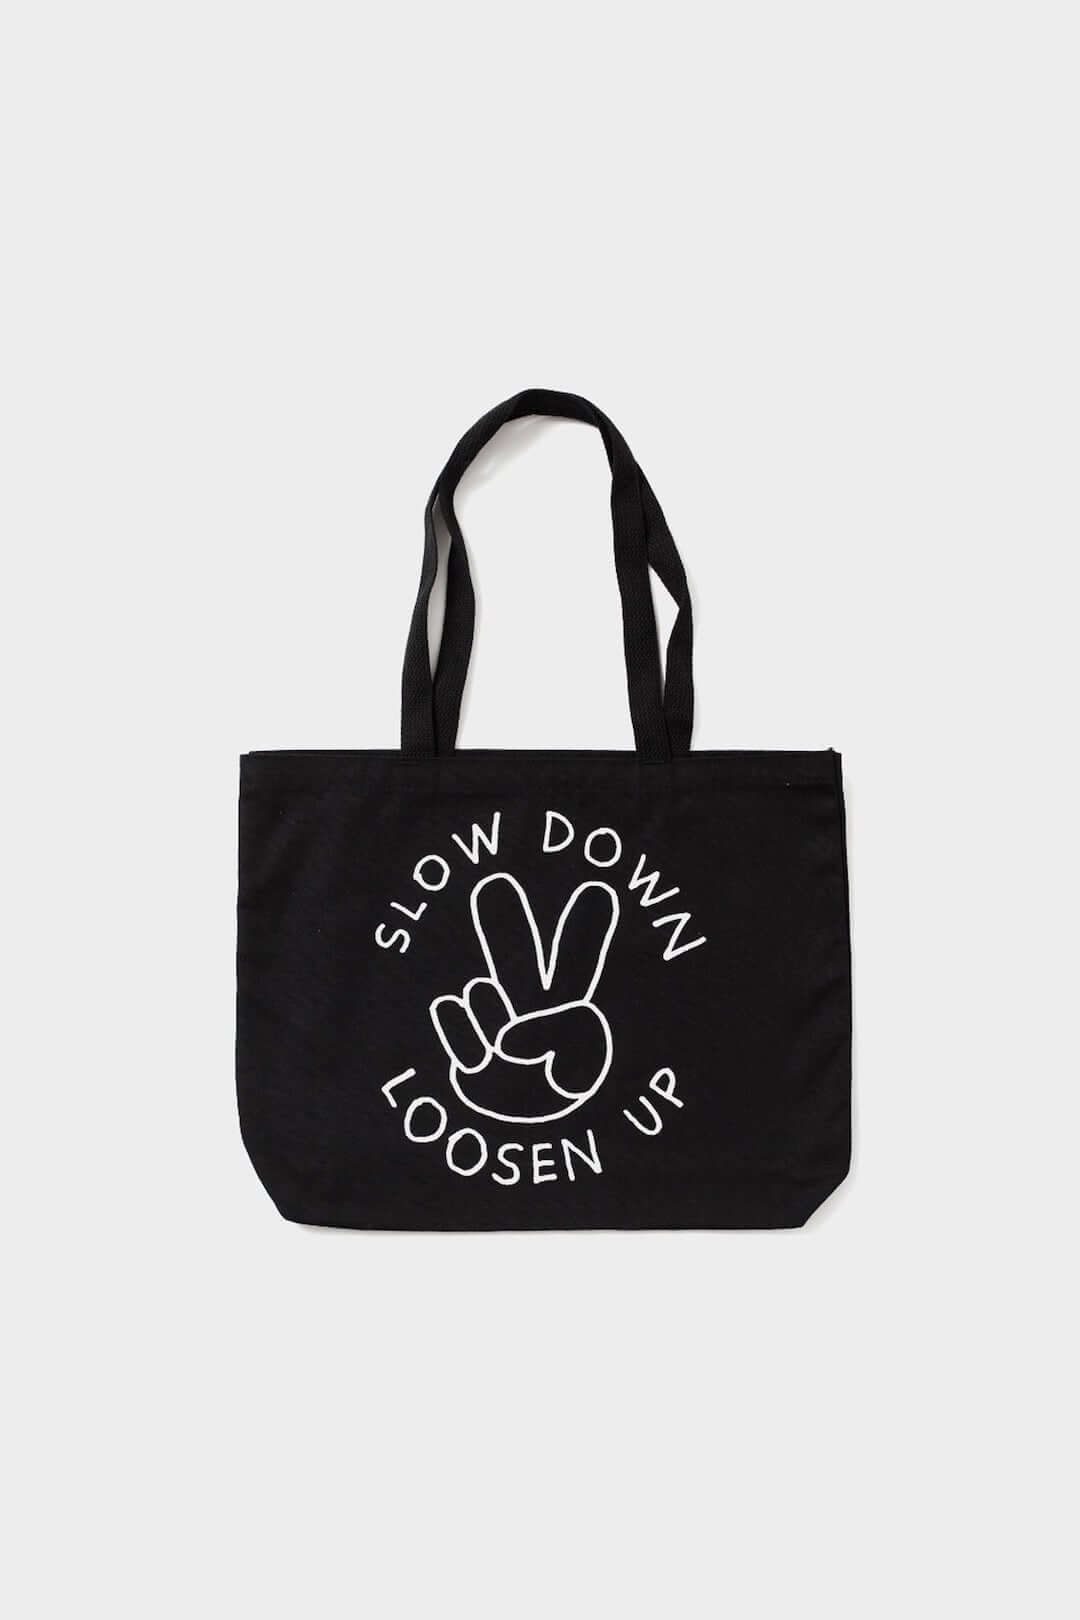 Slow Down Loosen Up Tote Bag - Accessories - DNO